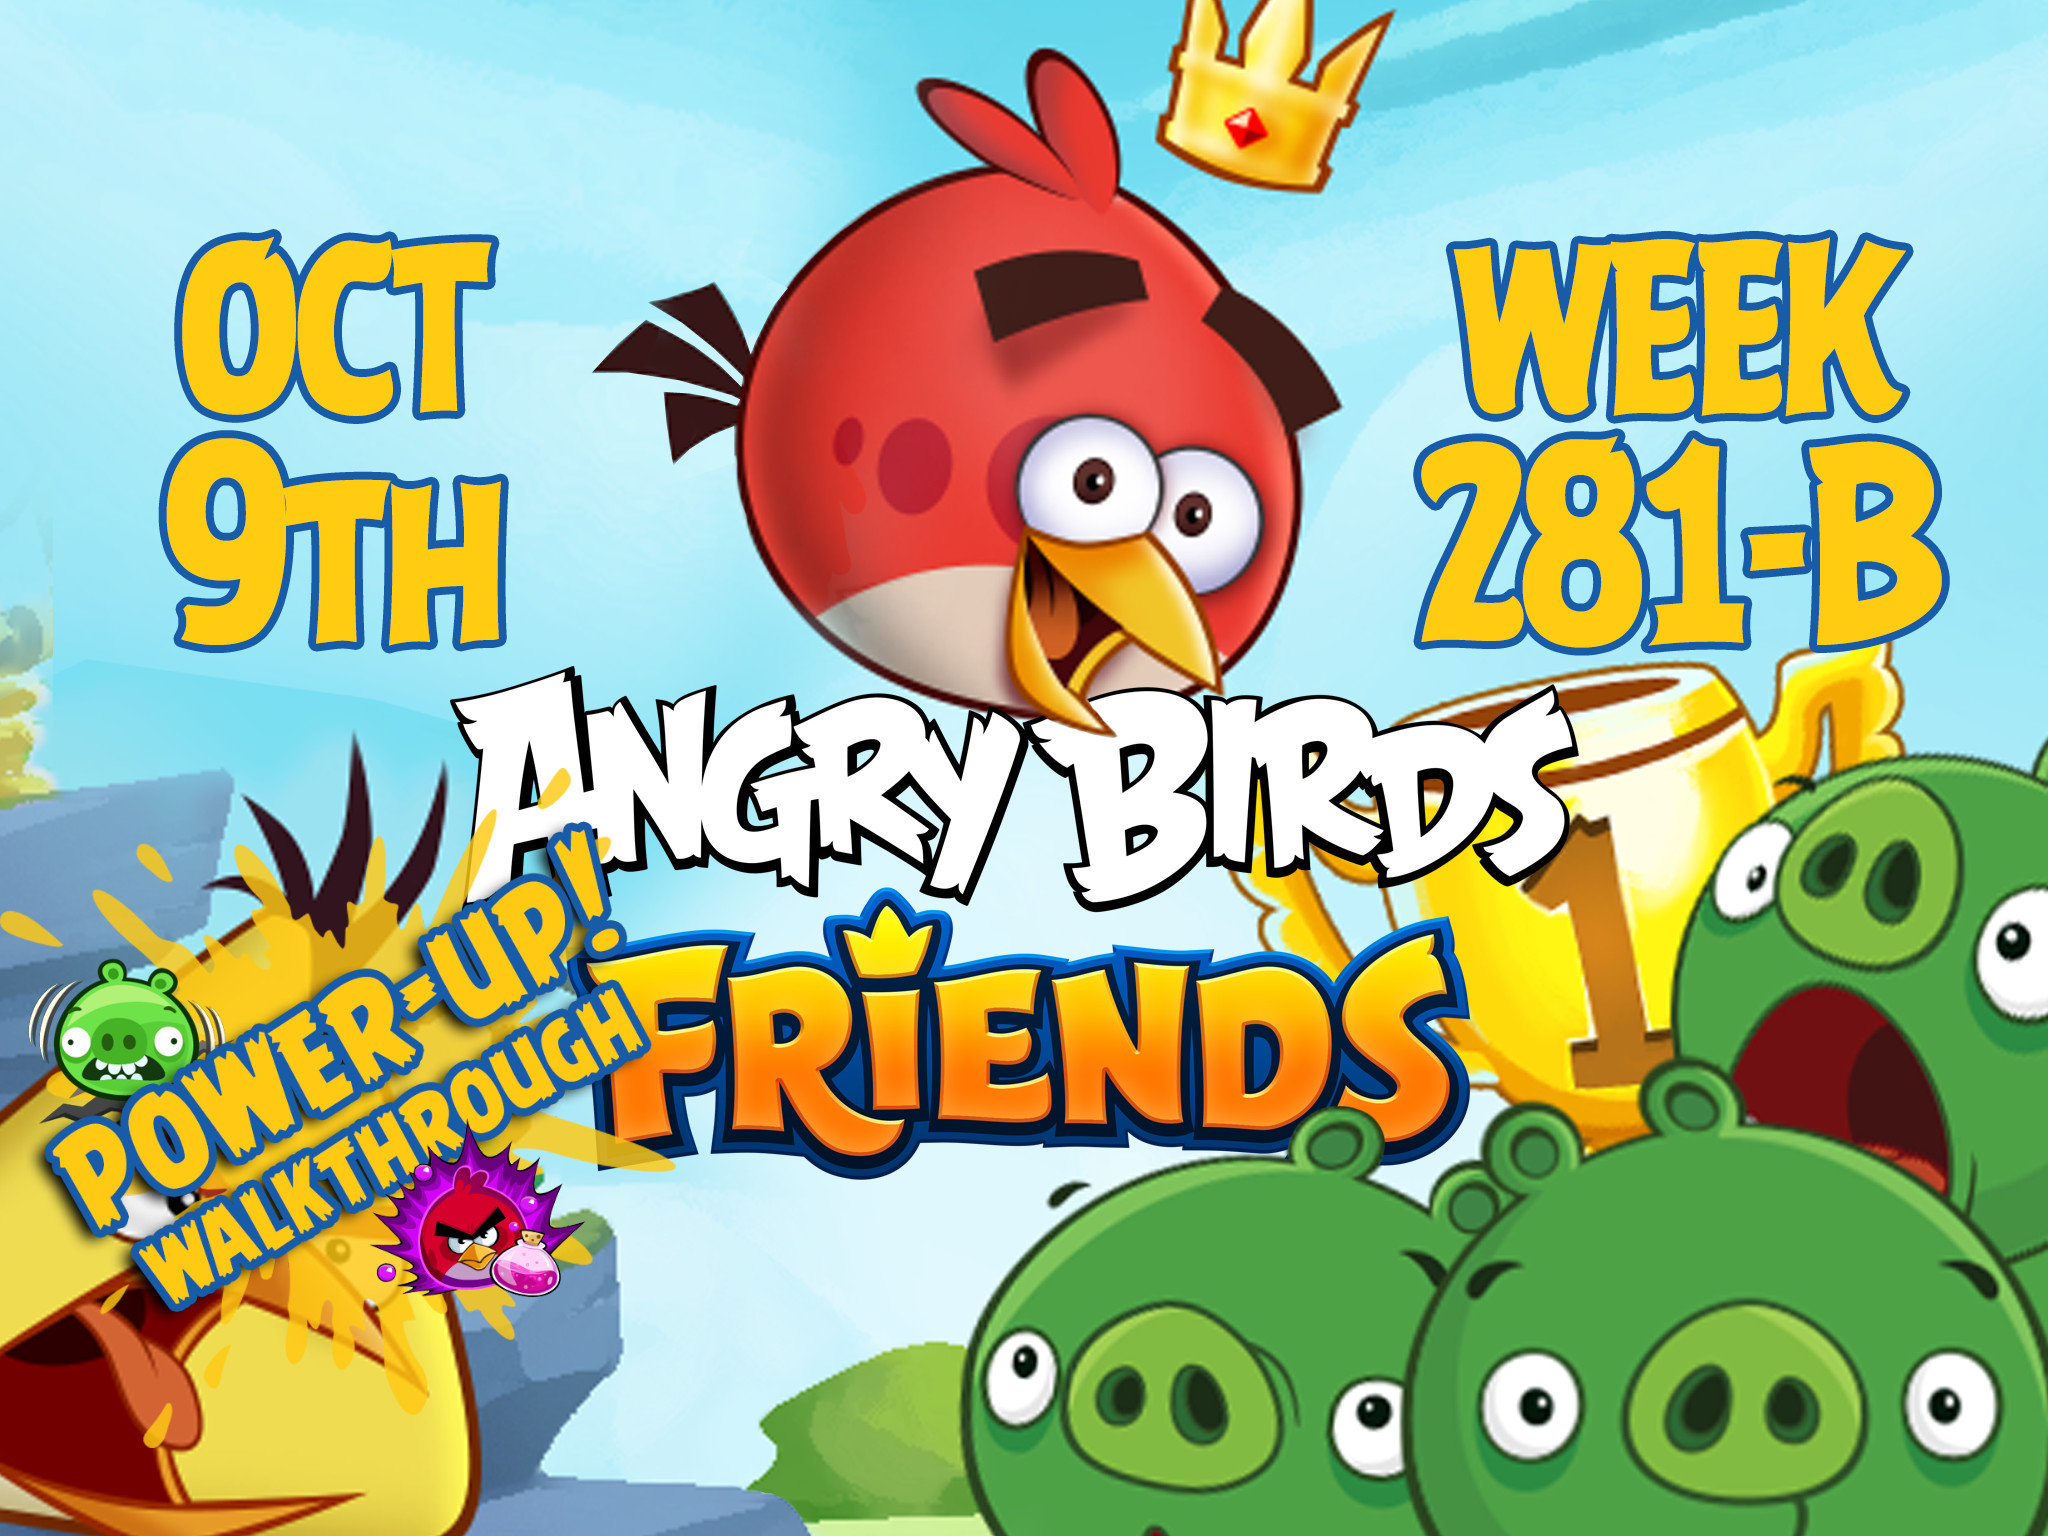 Angry Birds Friends Tournament Week 281-B Feature Image PU